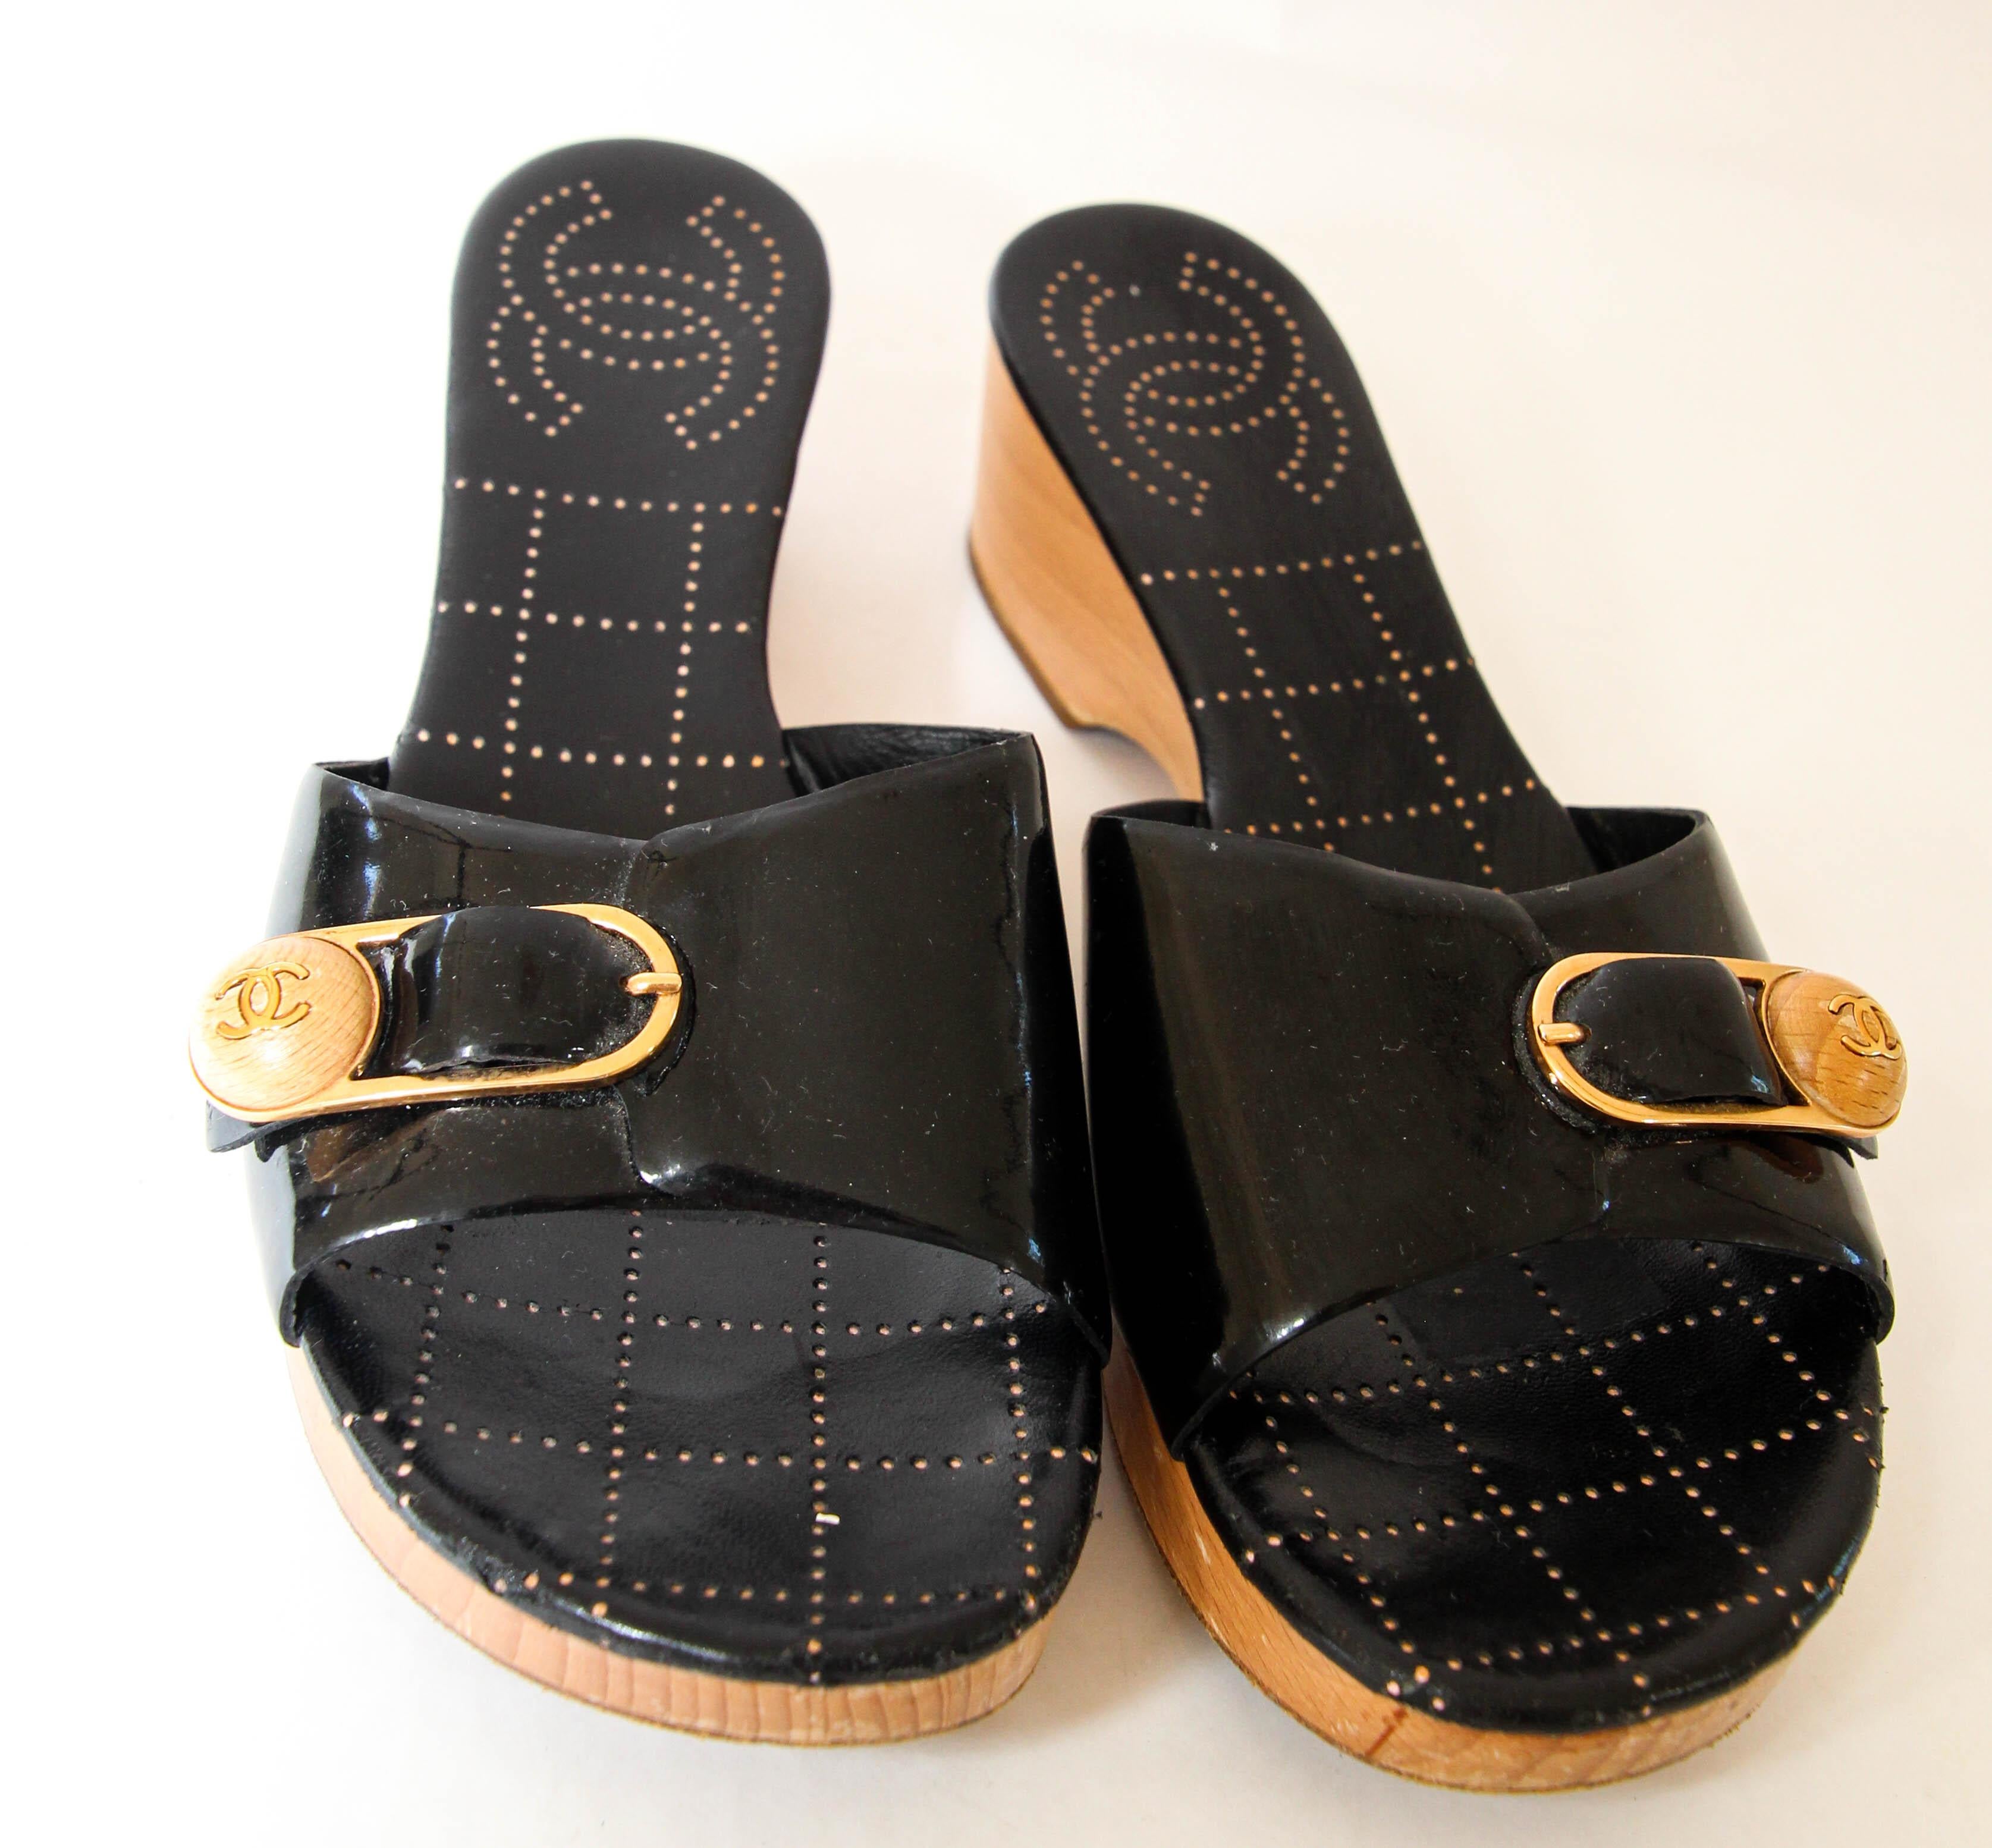 CHANEL gold wooden CC buckle black leather wooden platform clog sandals US 7 1/2 B EU38.
CHANEL gold wooden CC buckle black leather wooden platform clog sandals 
Size: 7.5 B EU38

CHANEL Black leather upper. Gold-tone metal with wooden CC buckle